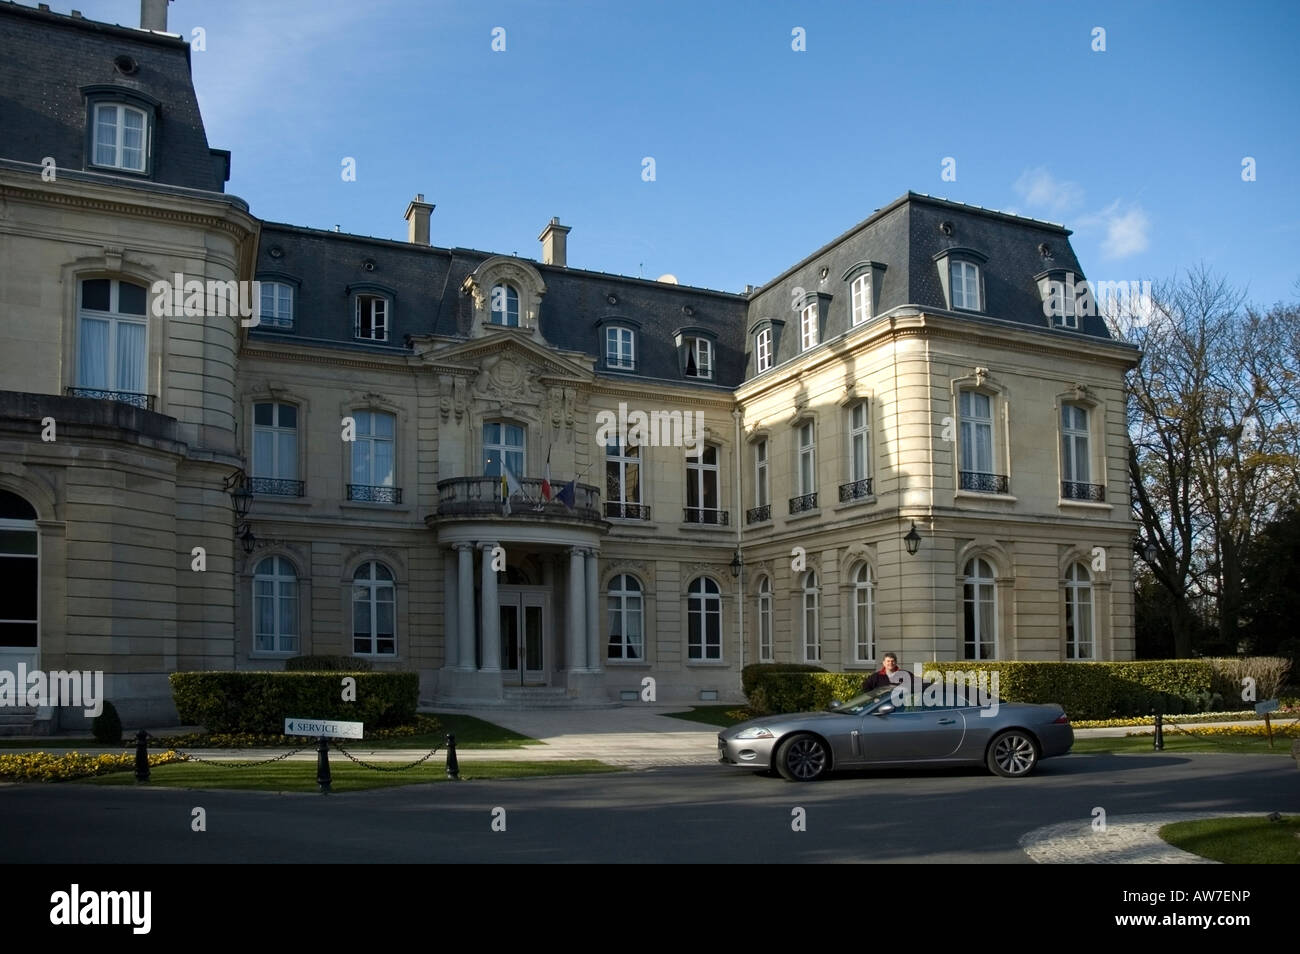 Front entrance to Chateau Les Crayers, jaguar XK convertible and the driver outside, Reims, Northern France, Europe, EU Stock Photo